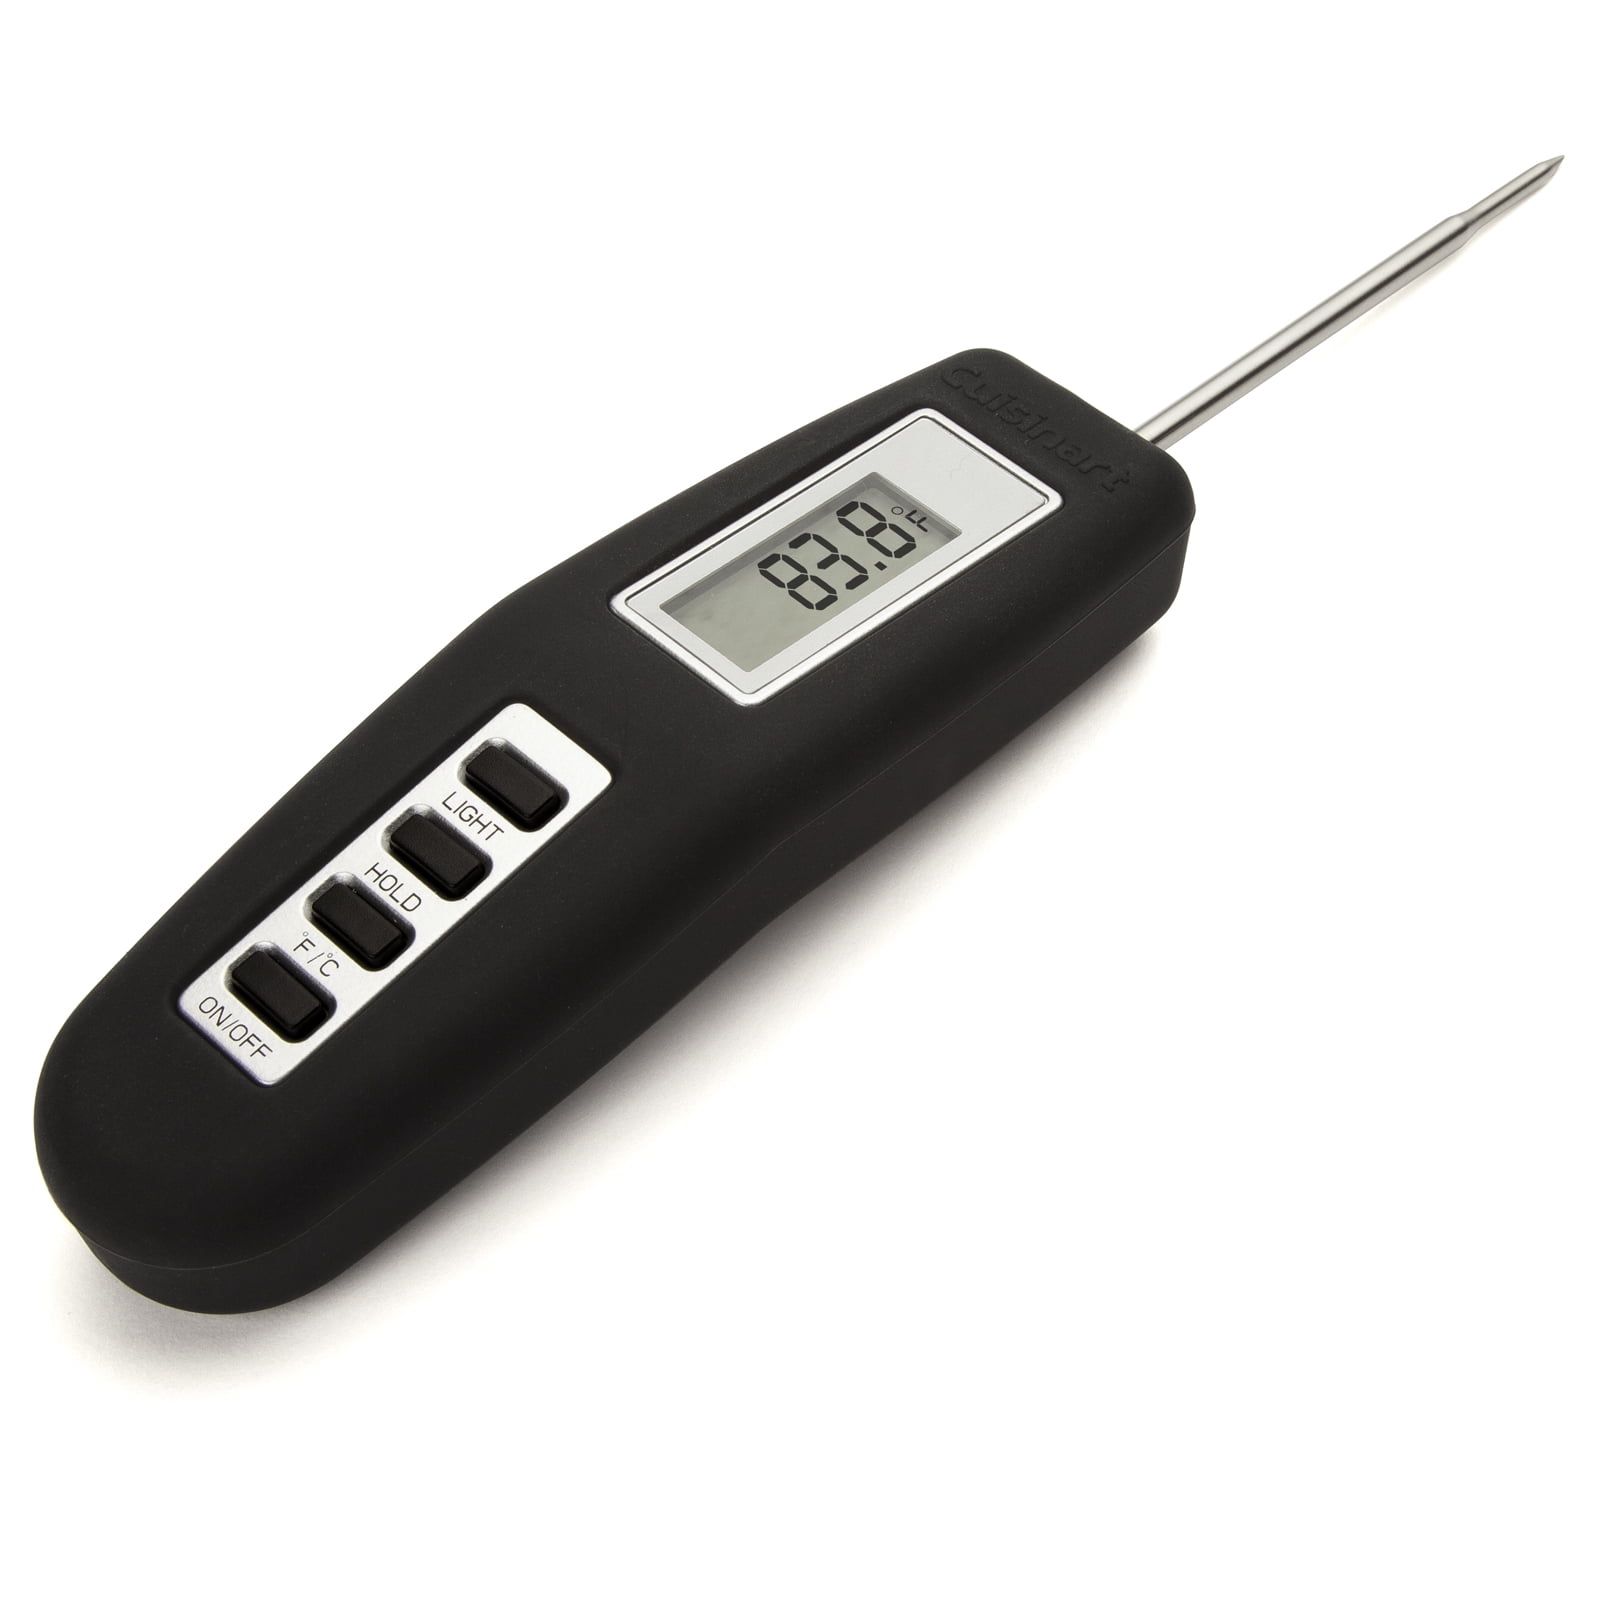 Cuisinart Analog Probe Meat Thermometer at